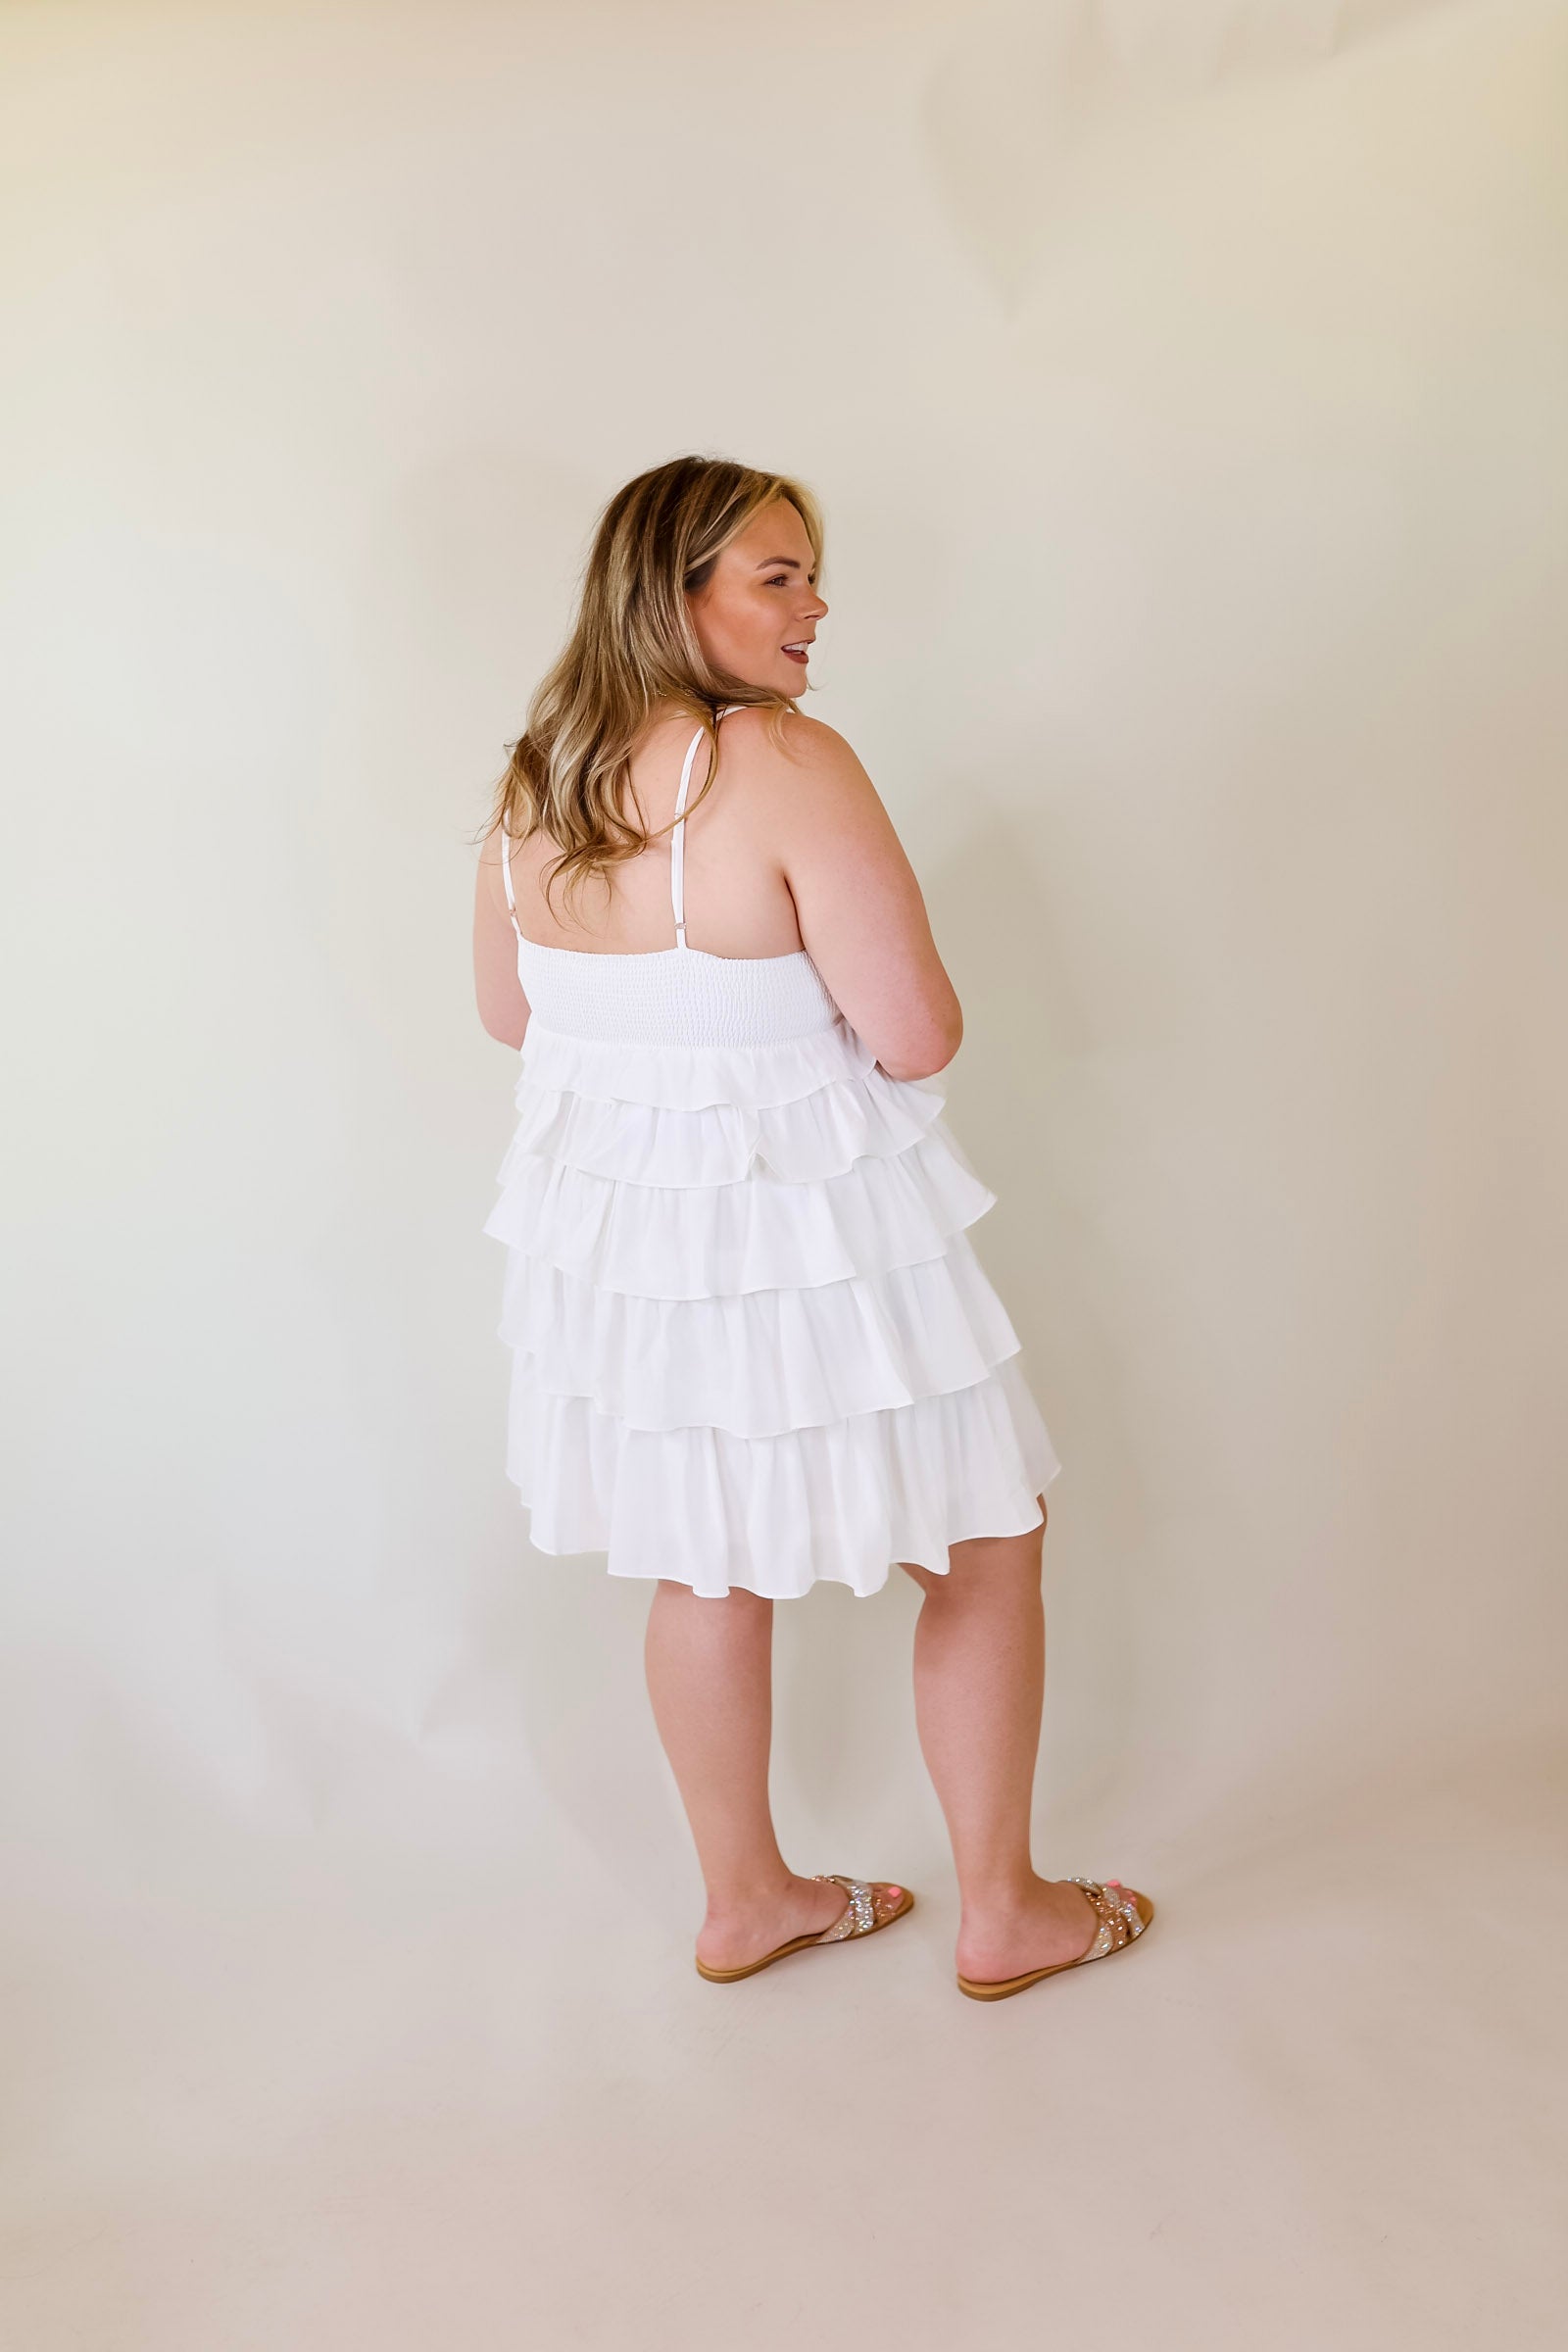 Dare to Dance Ruffled Spaghetti Strap Dress in White - Giddy Up Glamour Boutique